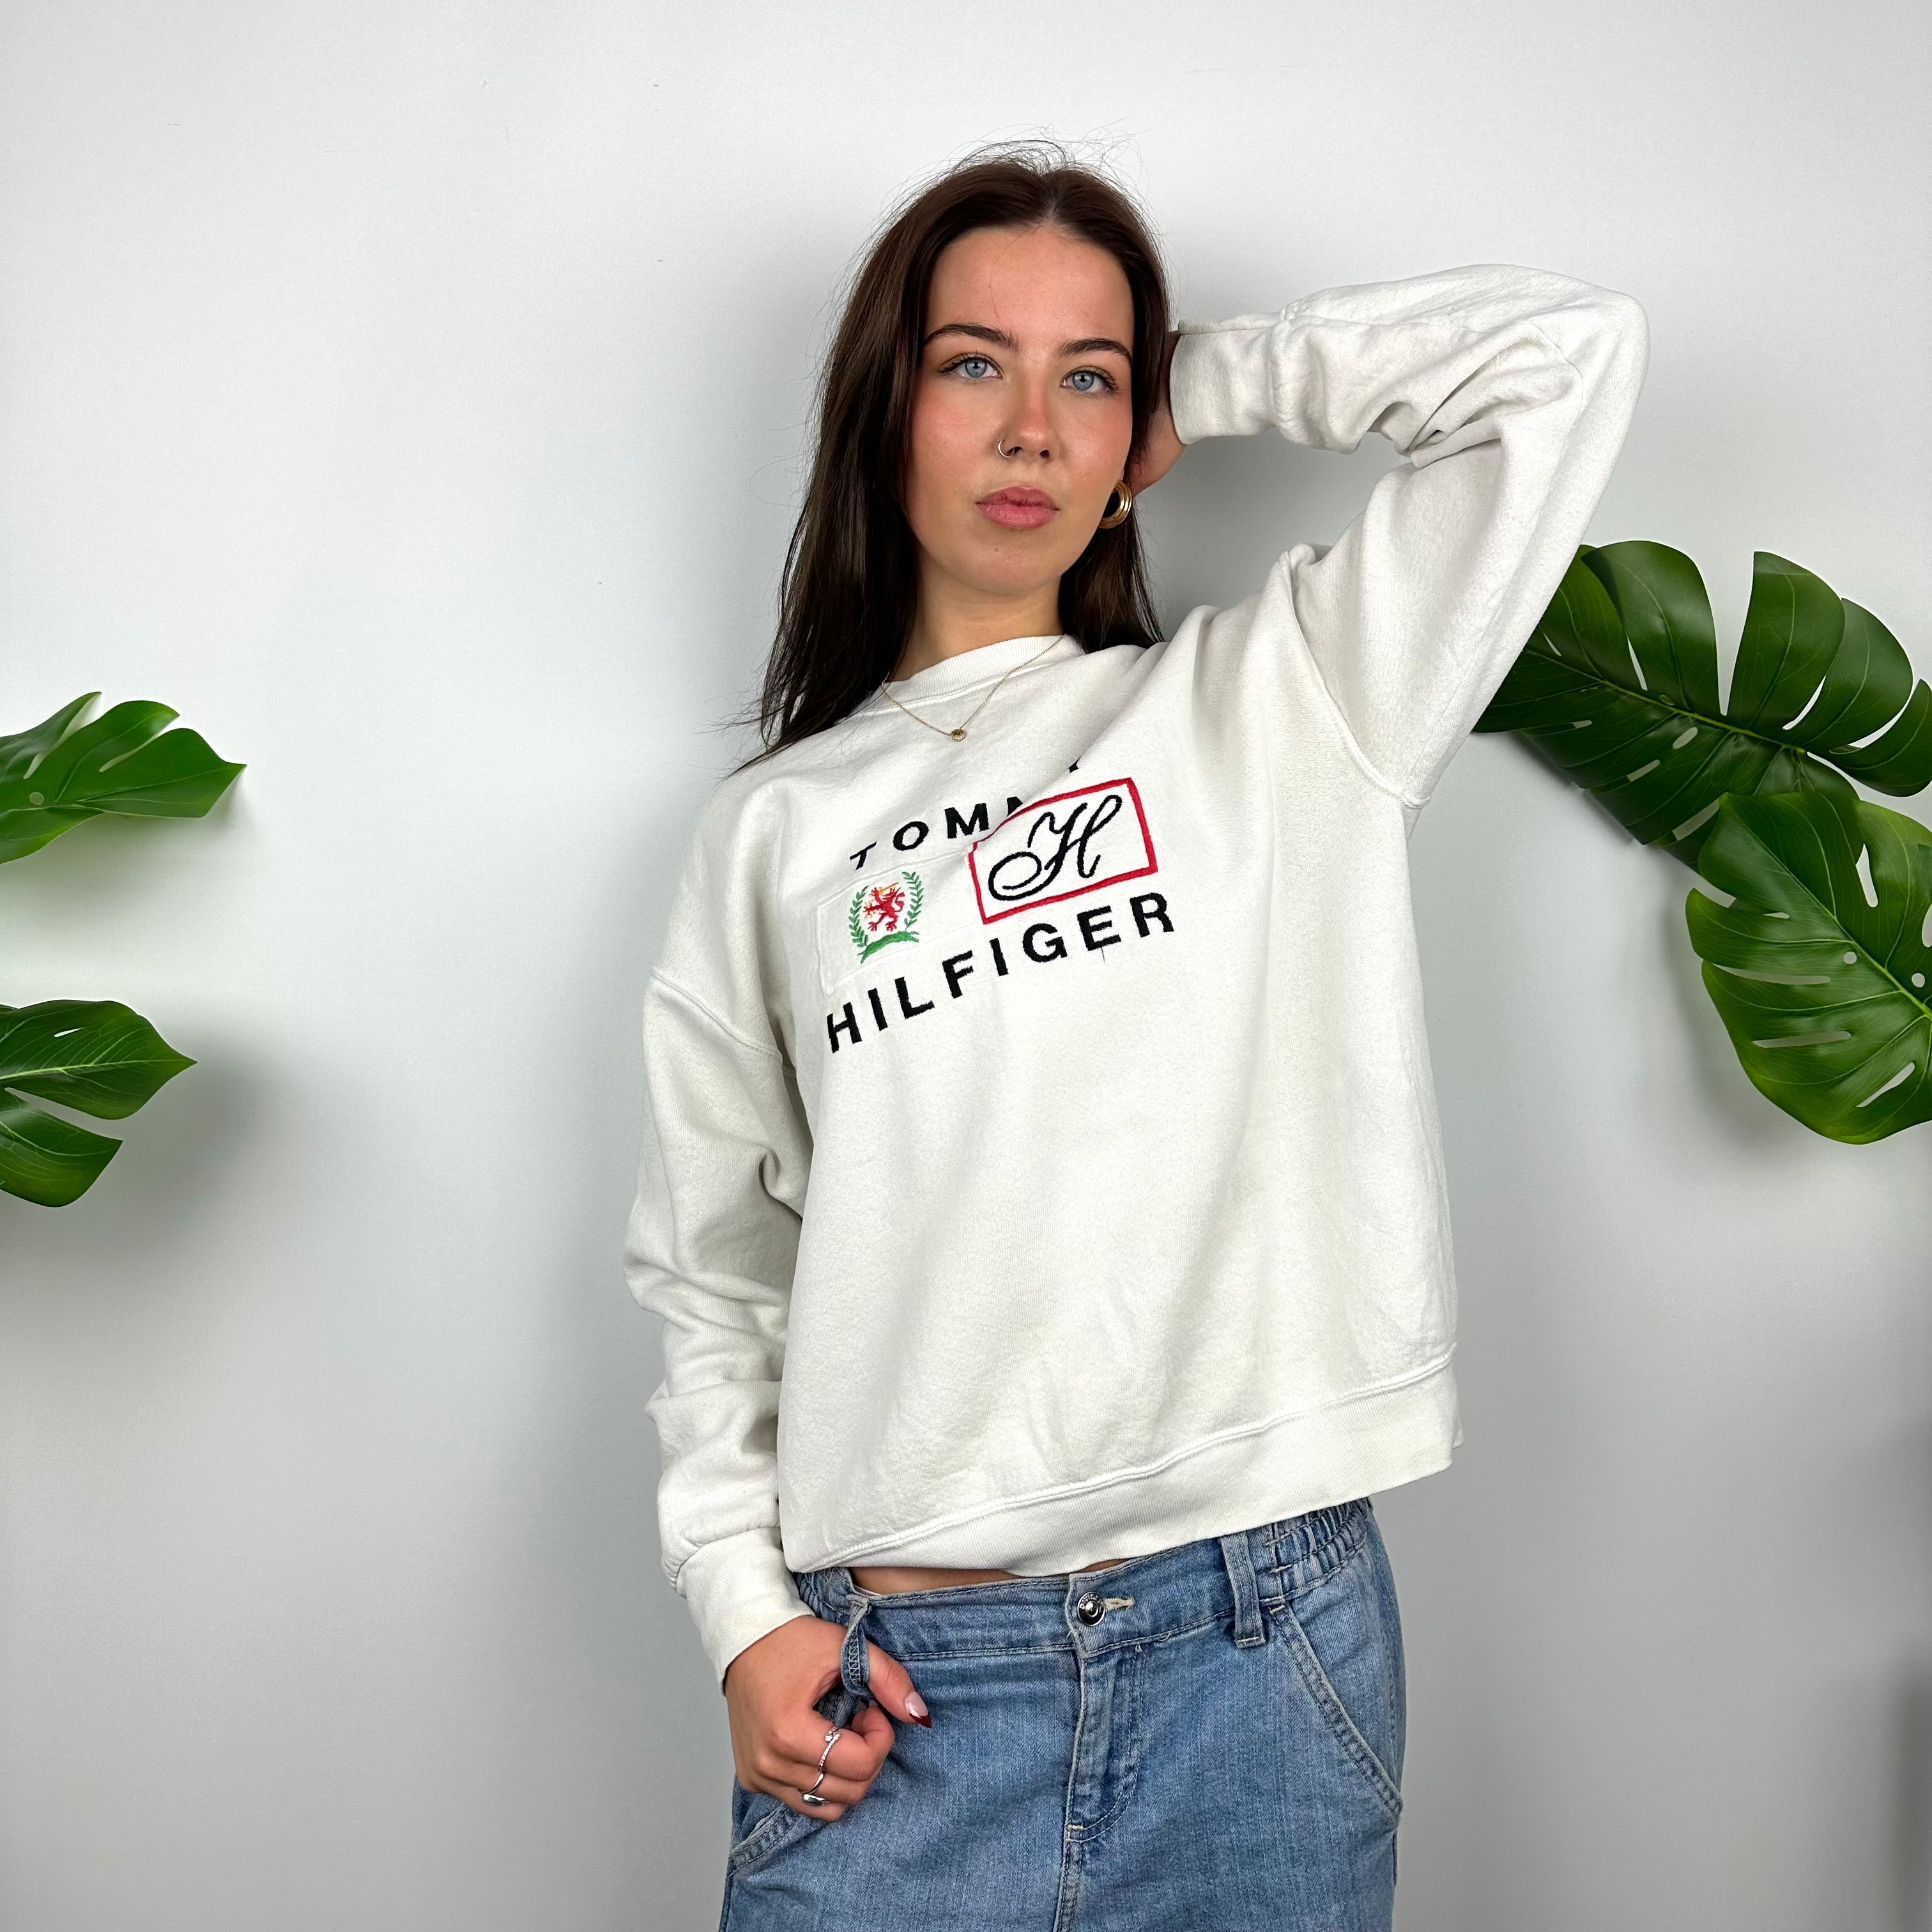 Tommy Hilfiger White Embroidered Spell Out Sweatshirt (M)